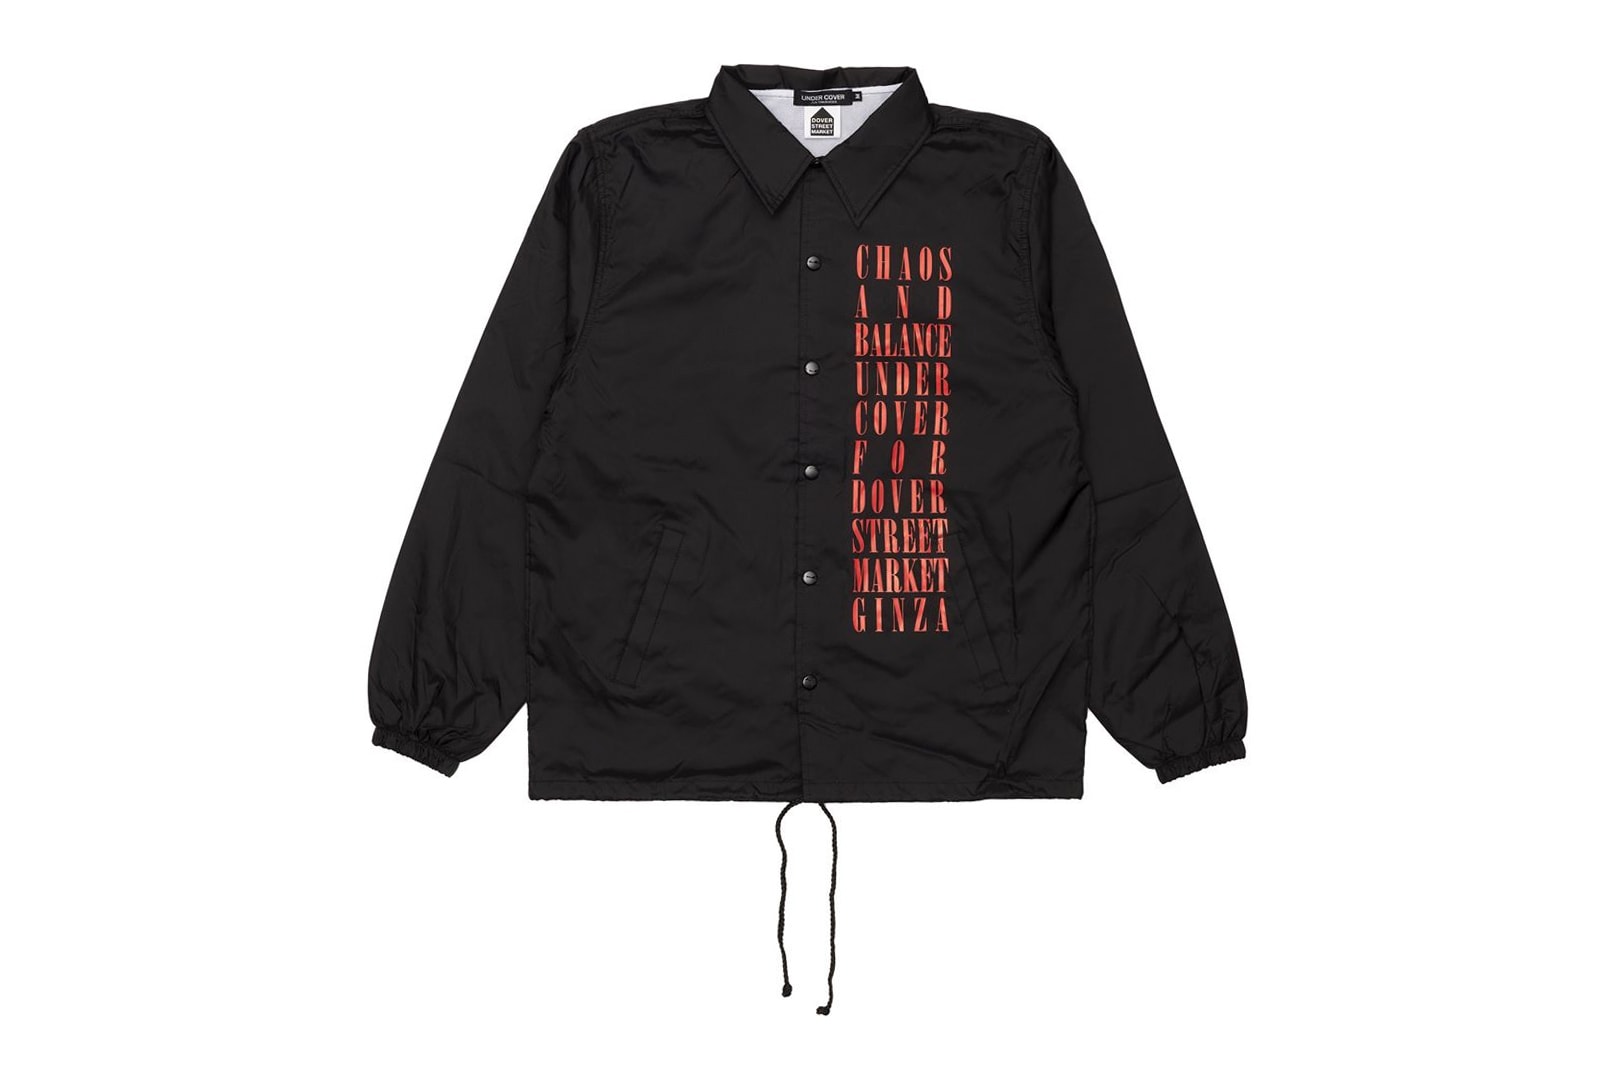 UNDERCOVER Dover Street Market Ginza 5th Anniversary Chaos and Balance Reaper Jacket Front